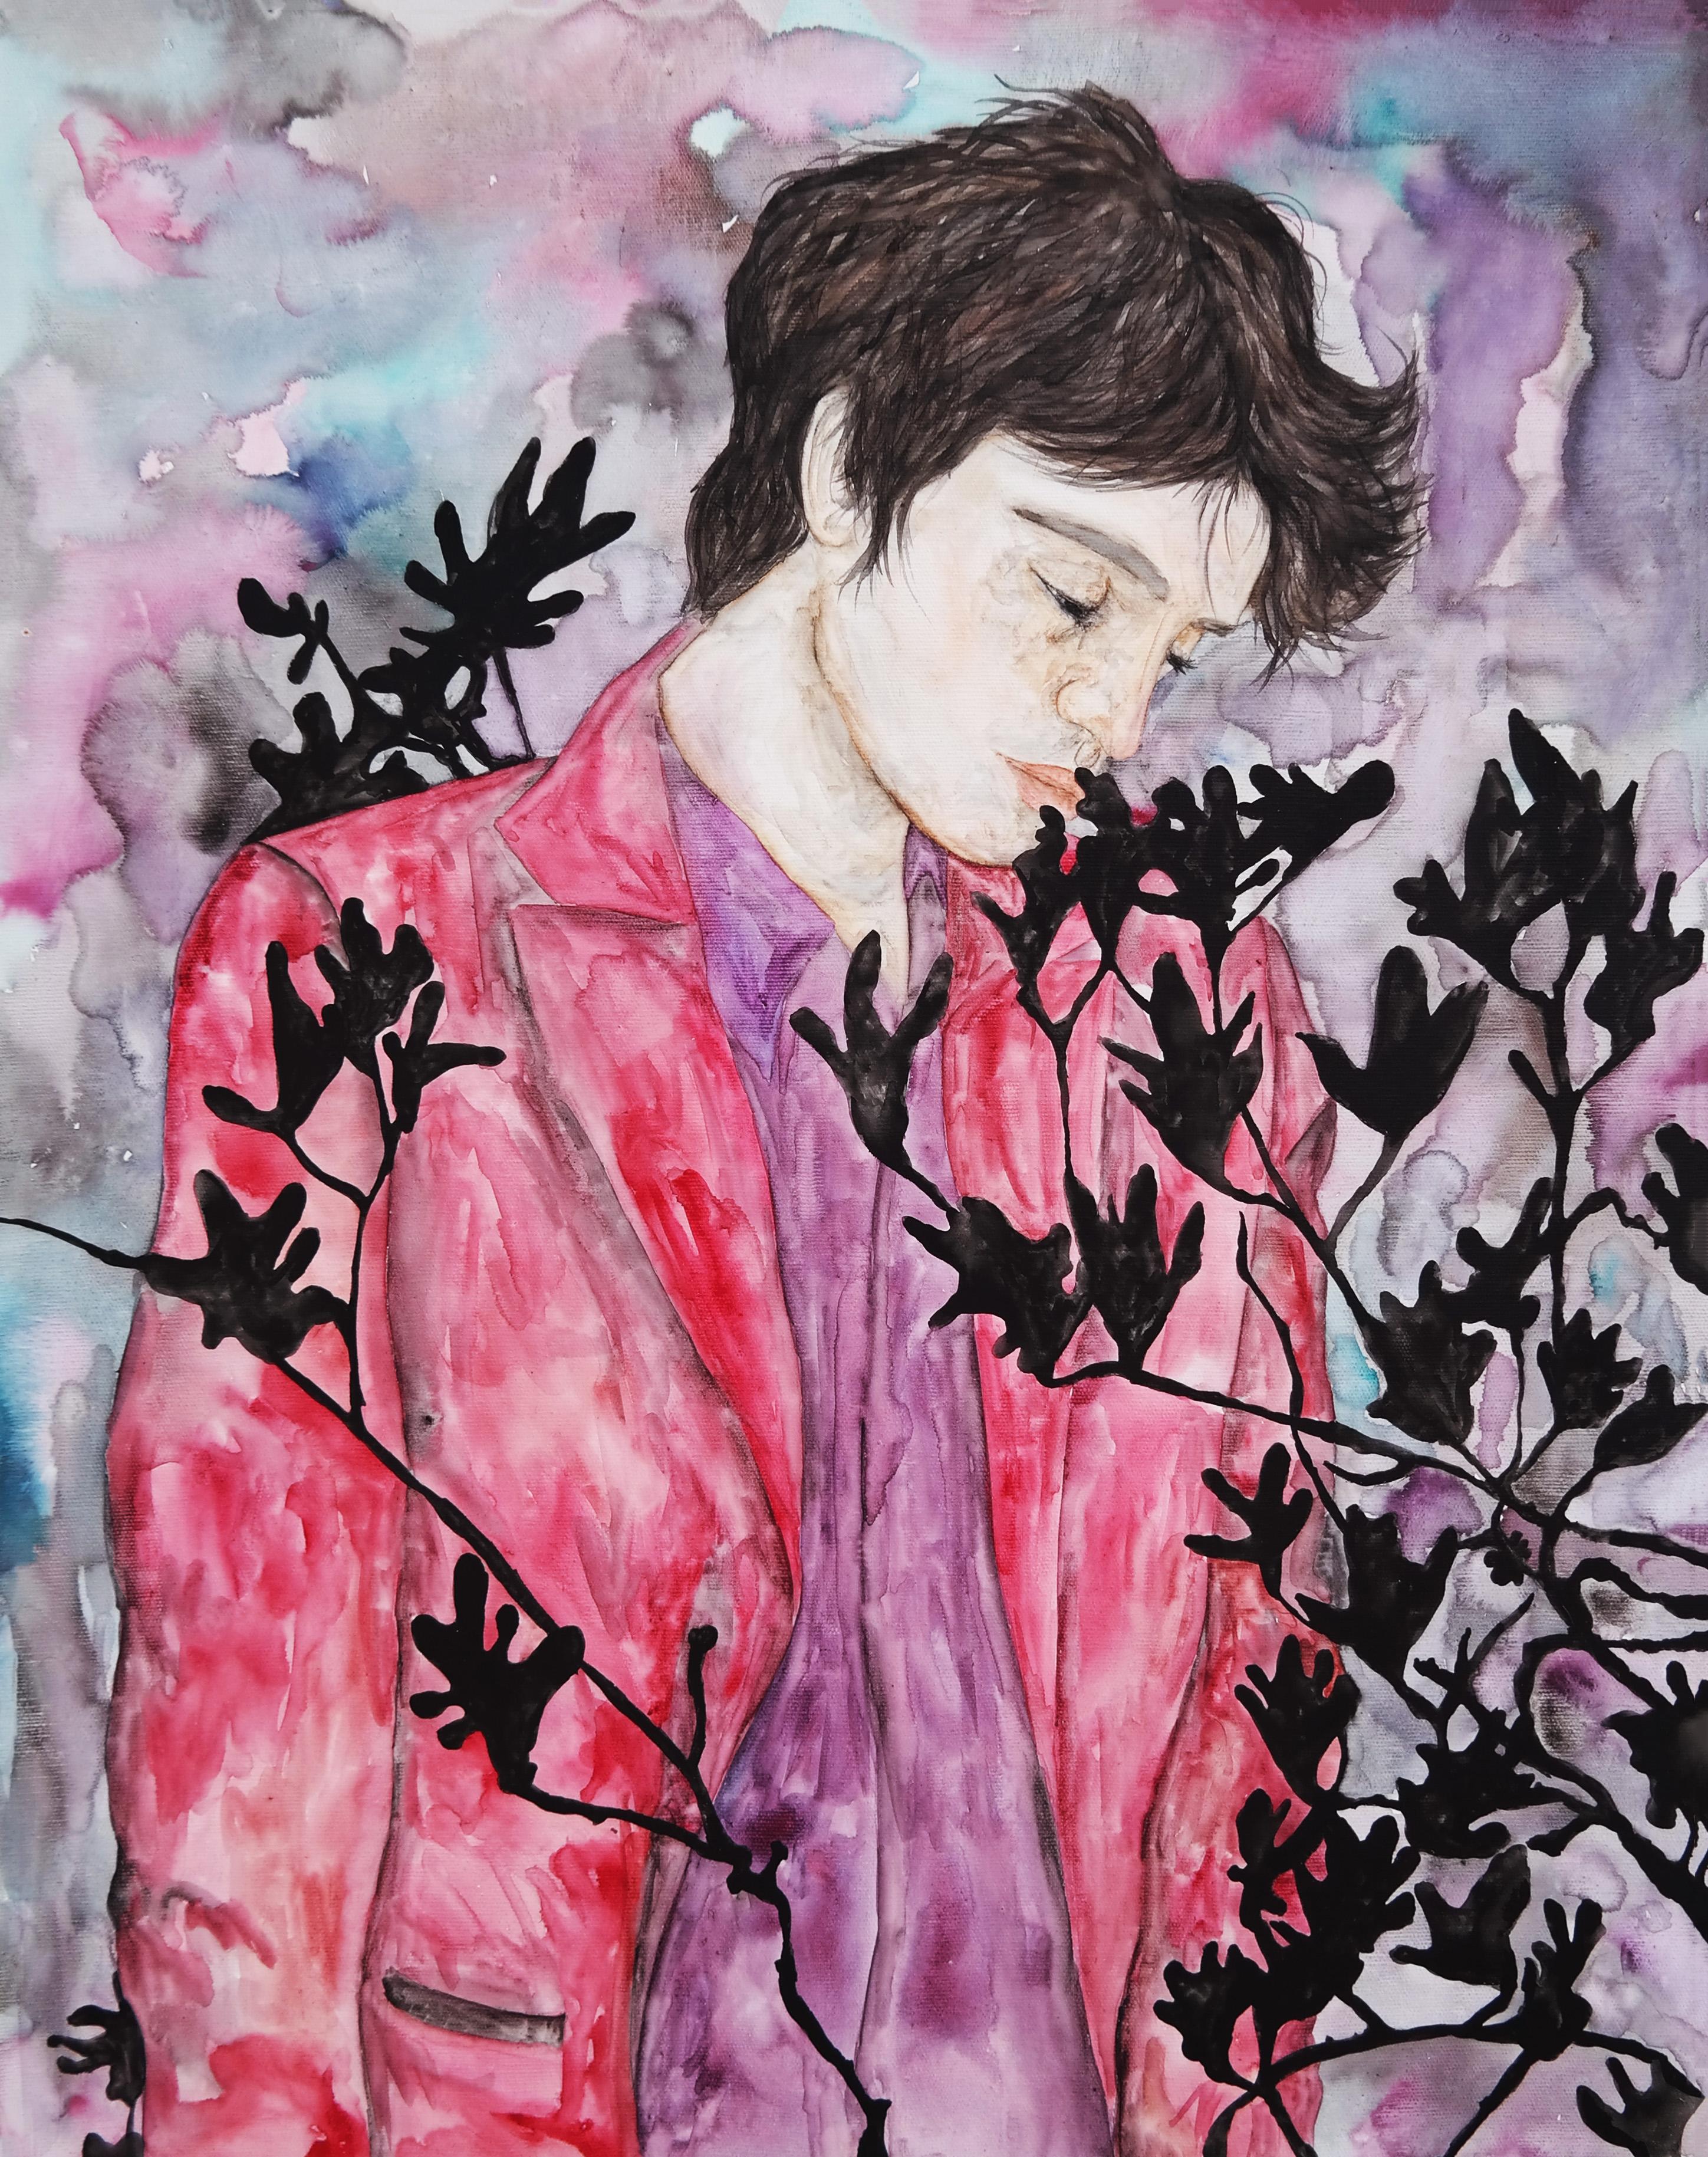 Dandy in the garden of black roses &Terrifying night of the first transformation - Painting by Ramonn Vieitez de Lima